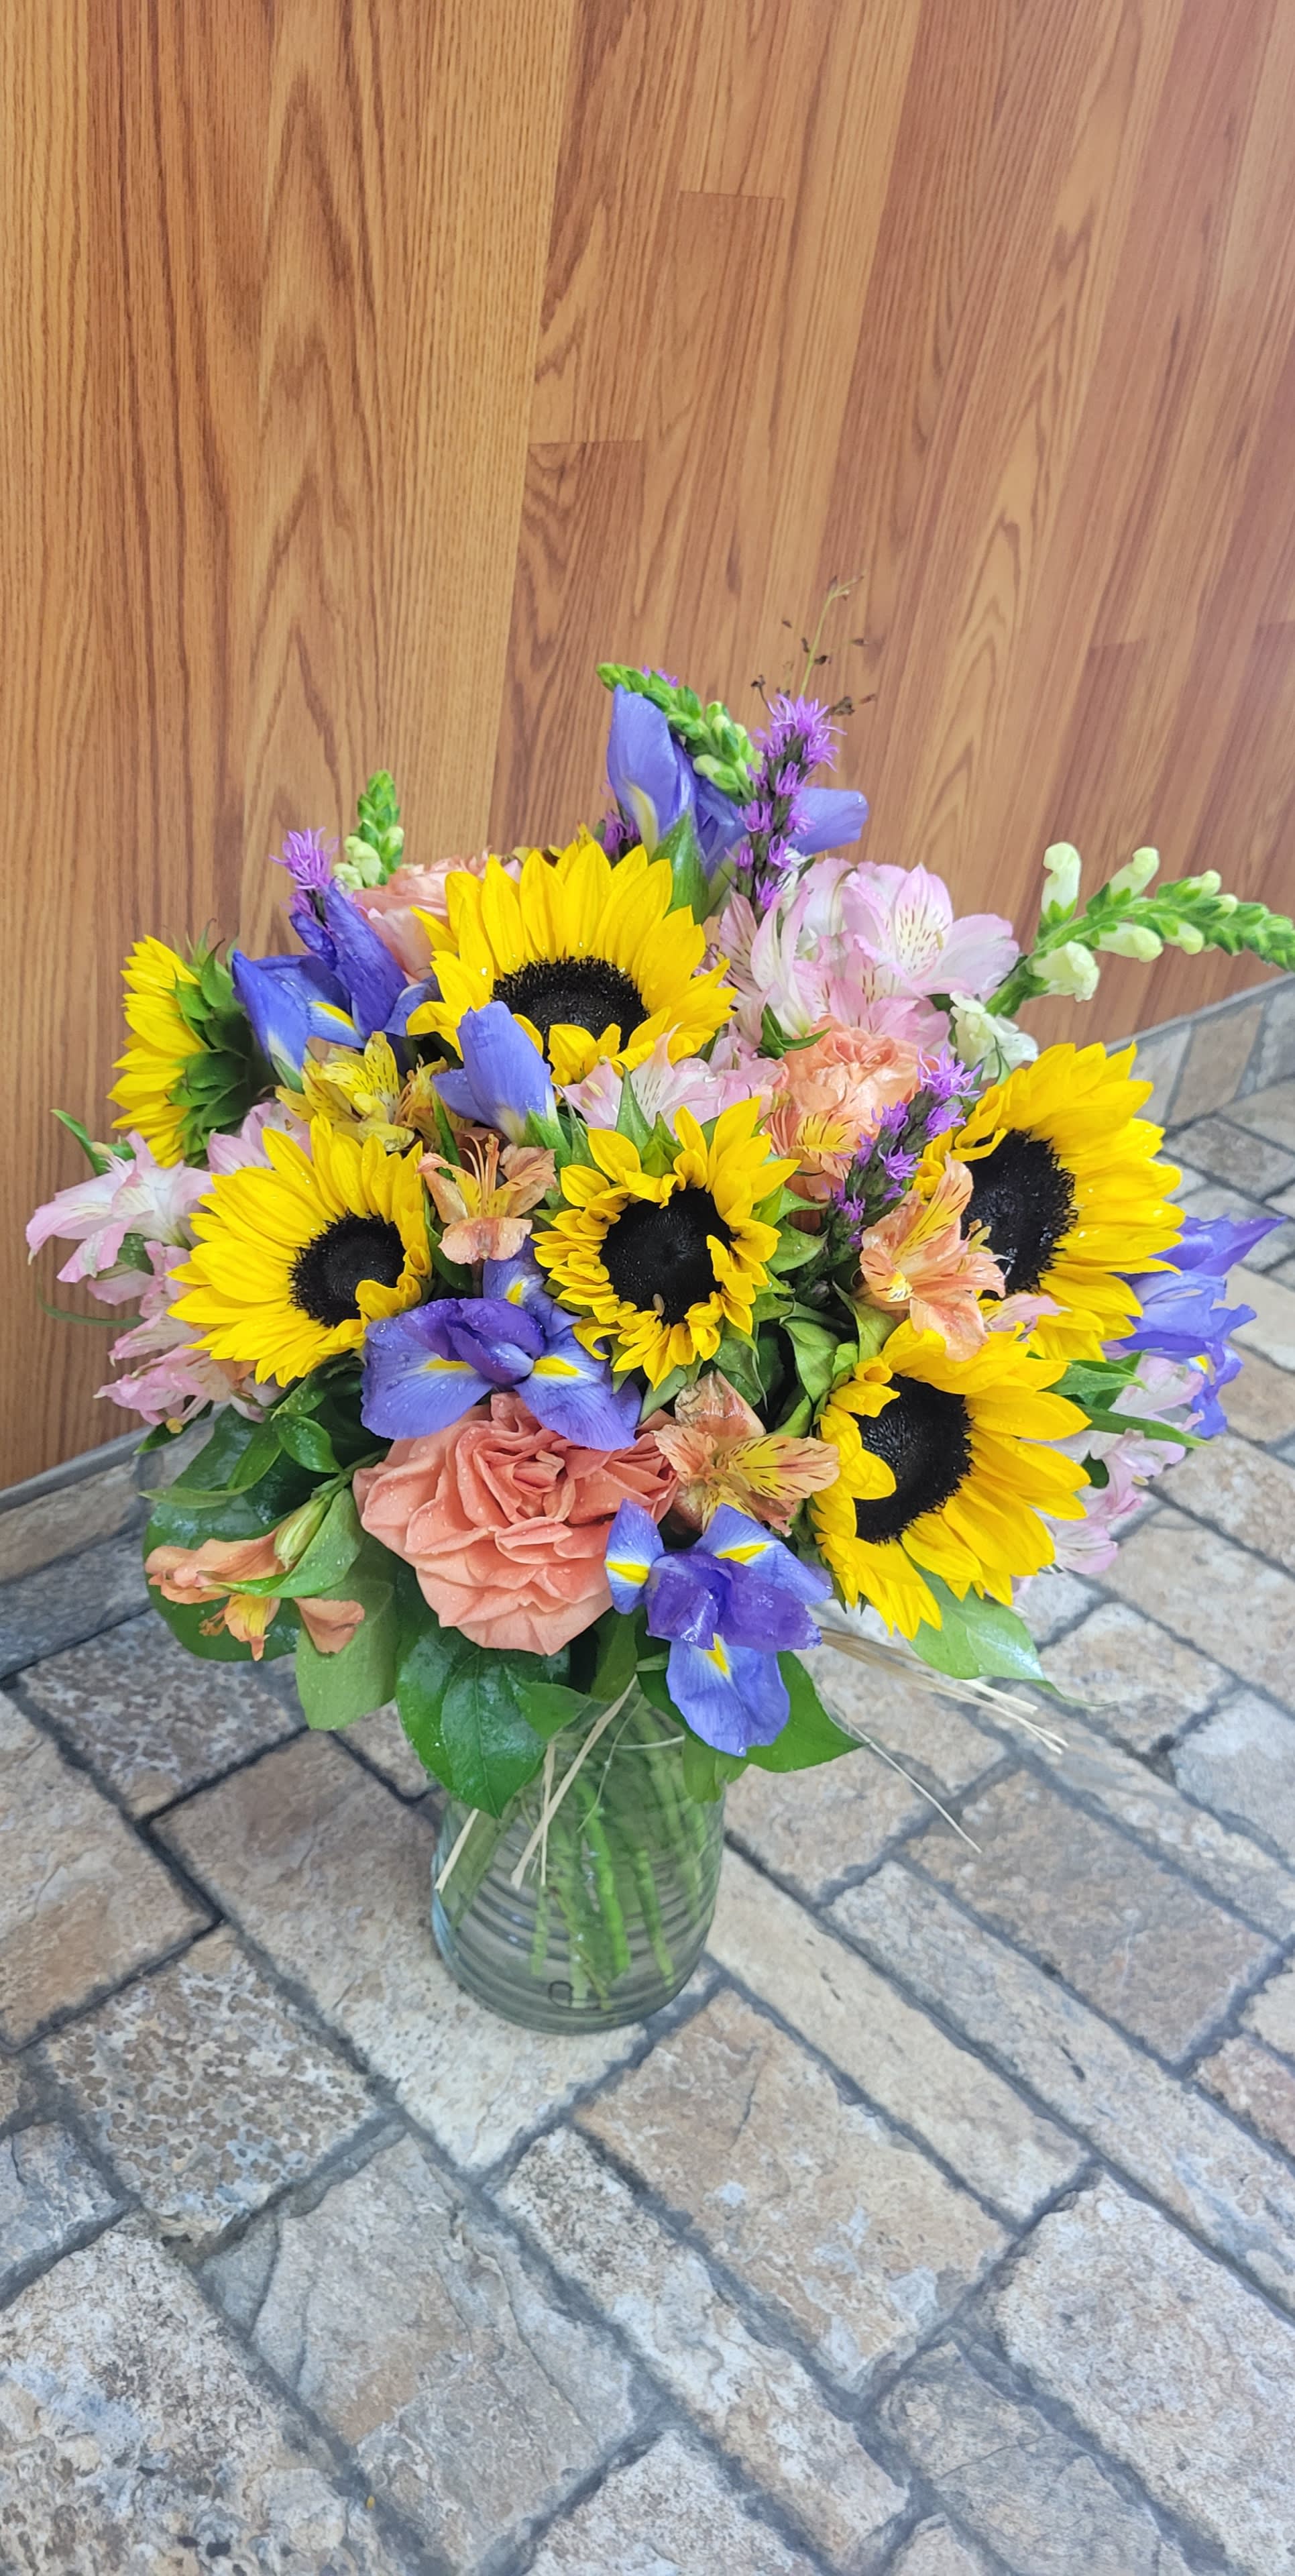 Pretty Portrait - A picturesque mix of sunflowers, snapdragons, iris, roses, alstroemeria, and fresh greenery. A thoughtful statement for that picture perfect person in your life. 